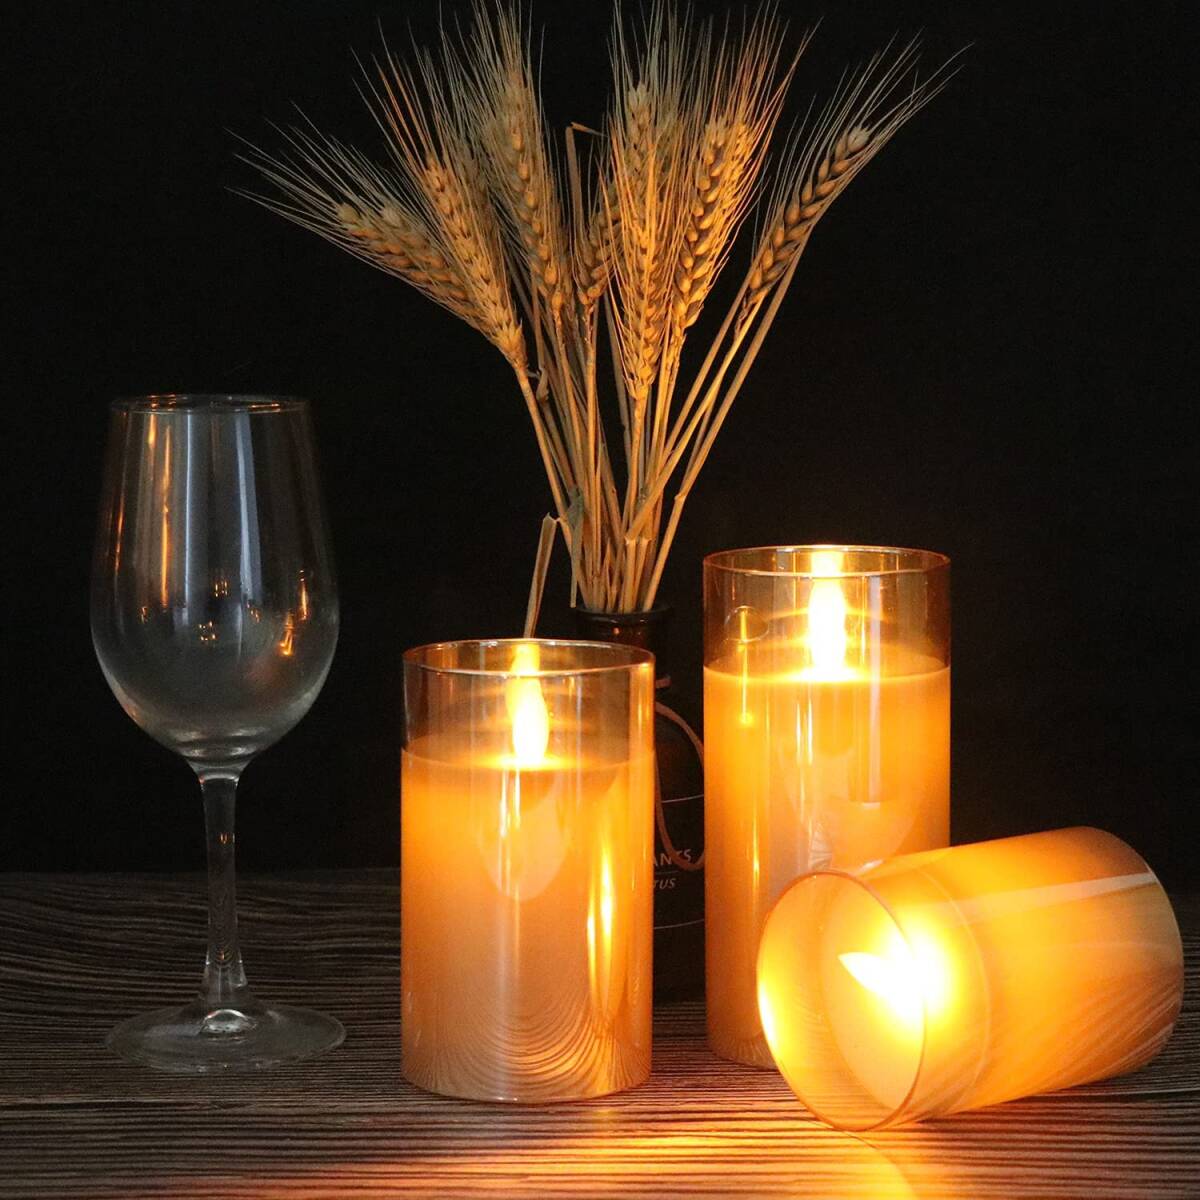  recommendation *LED candle light 3 point set Gold glass durability eminent navy blue 